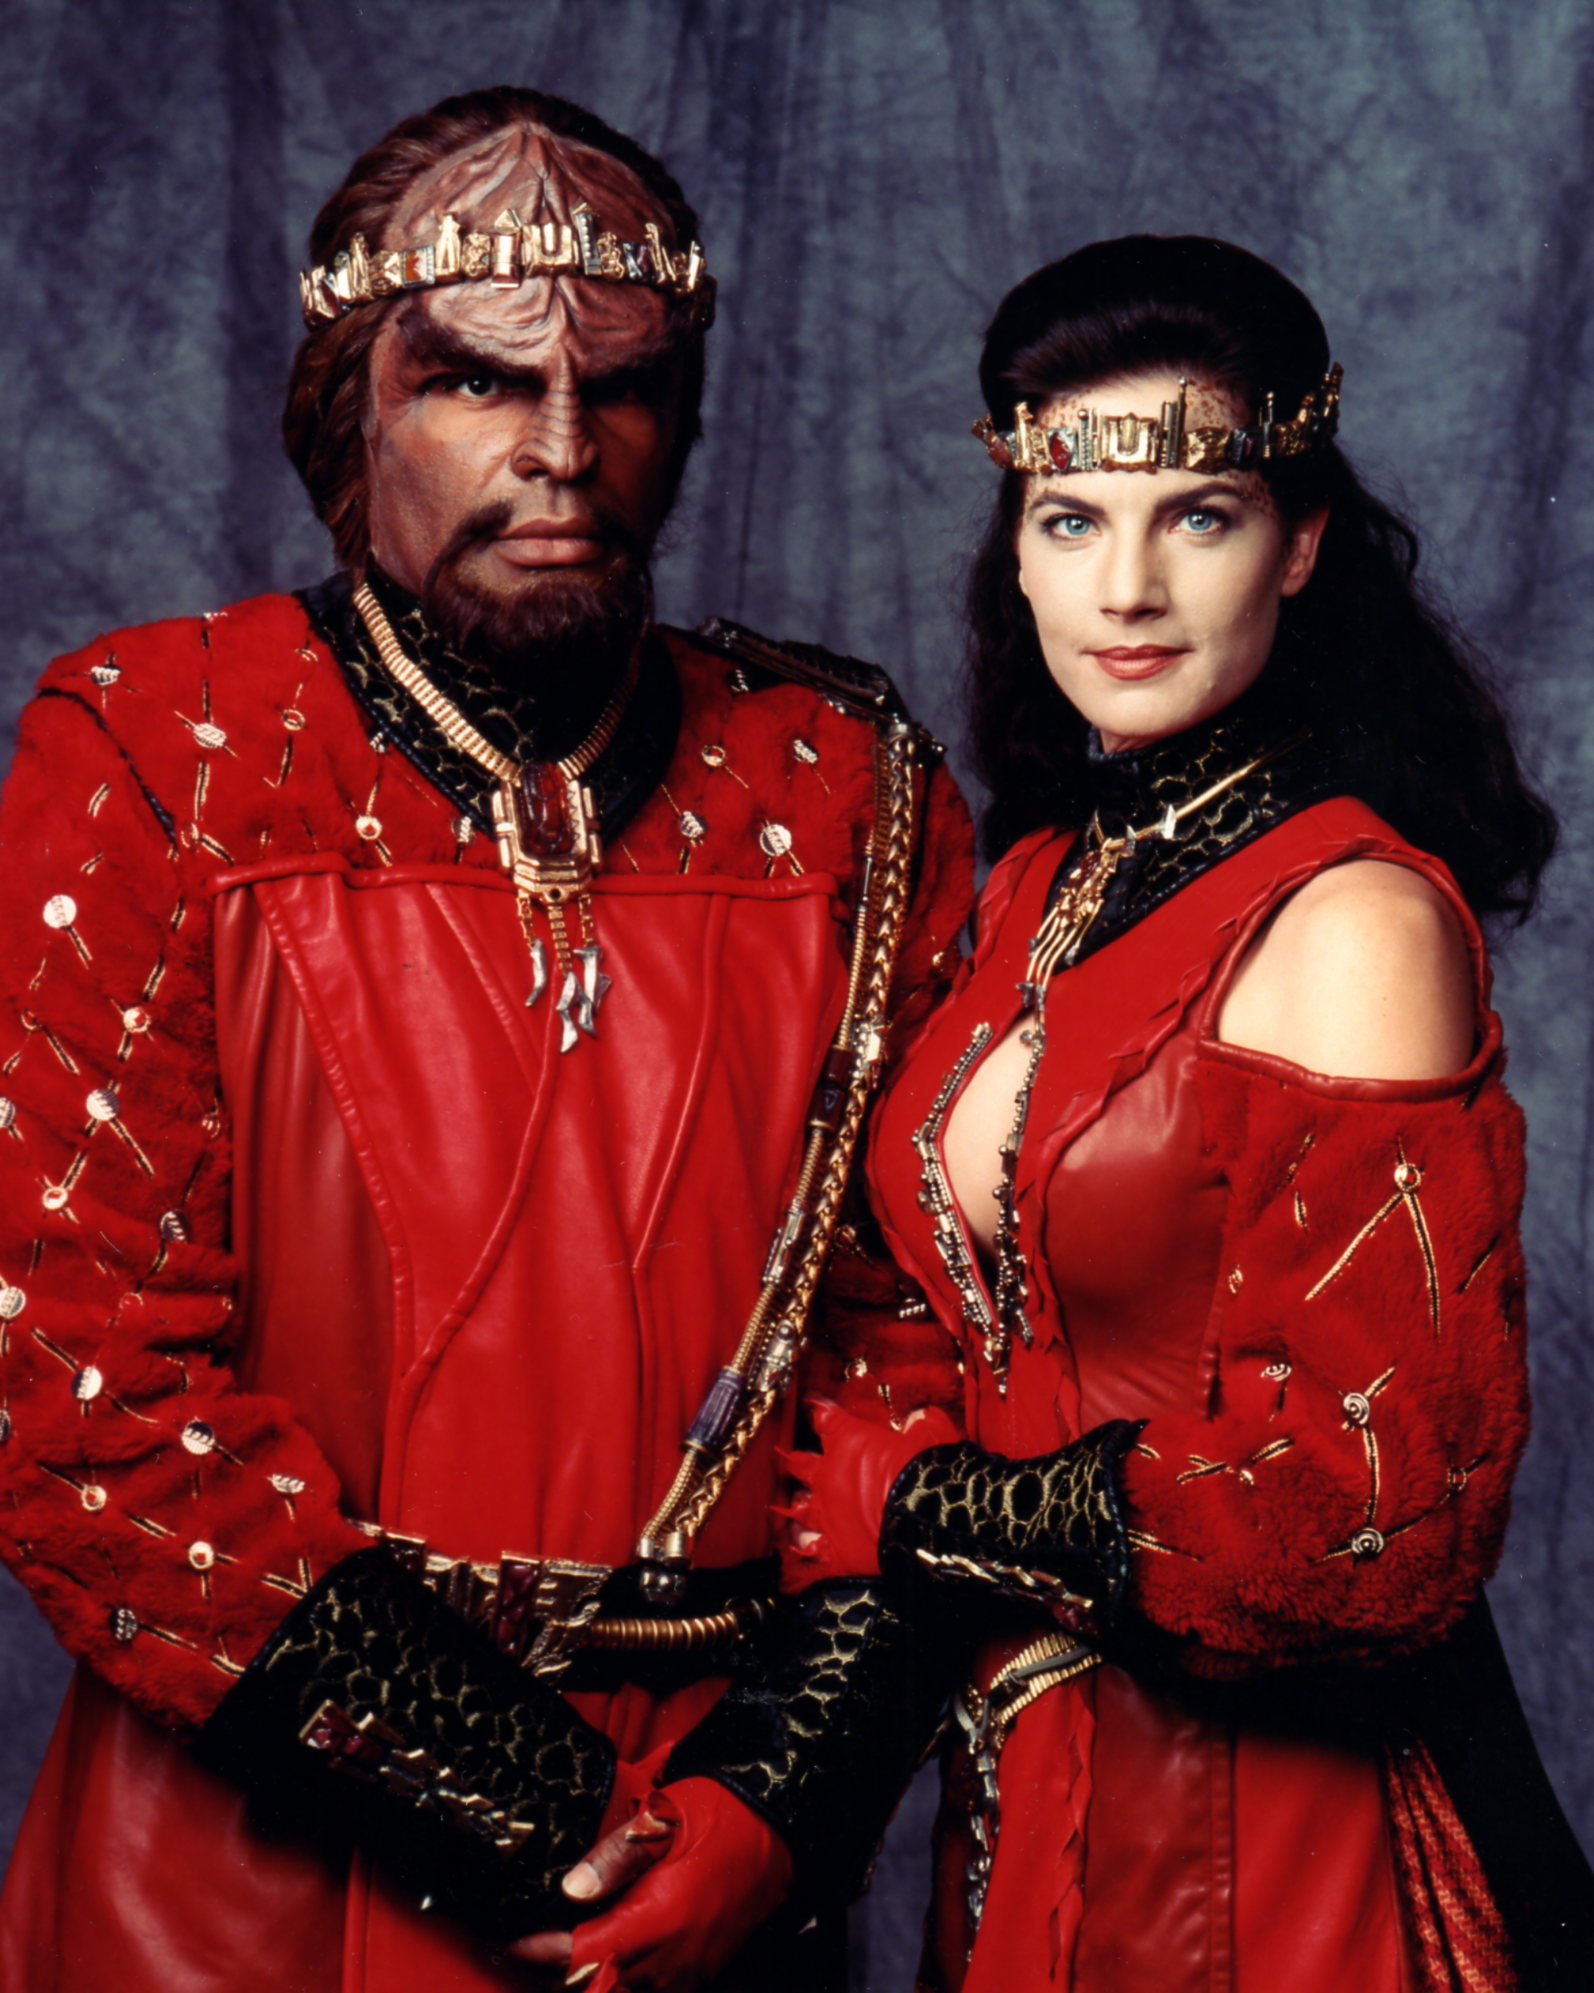 Michael Dorn and Terry Farrell